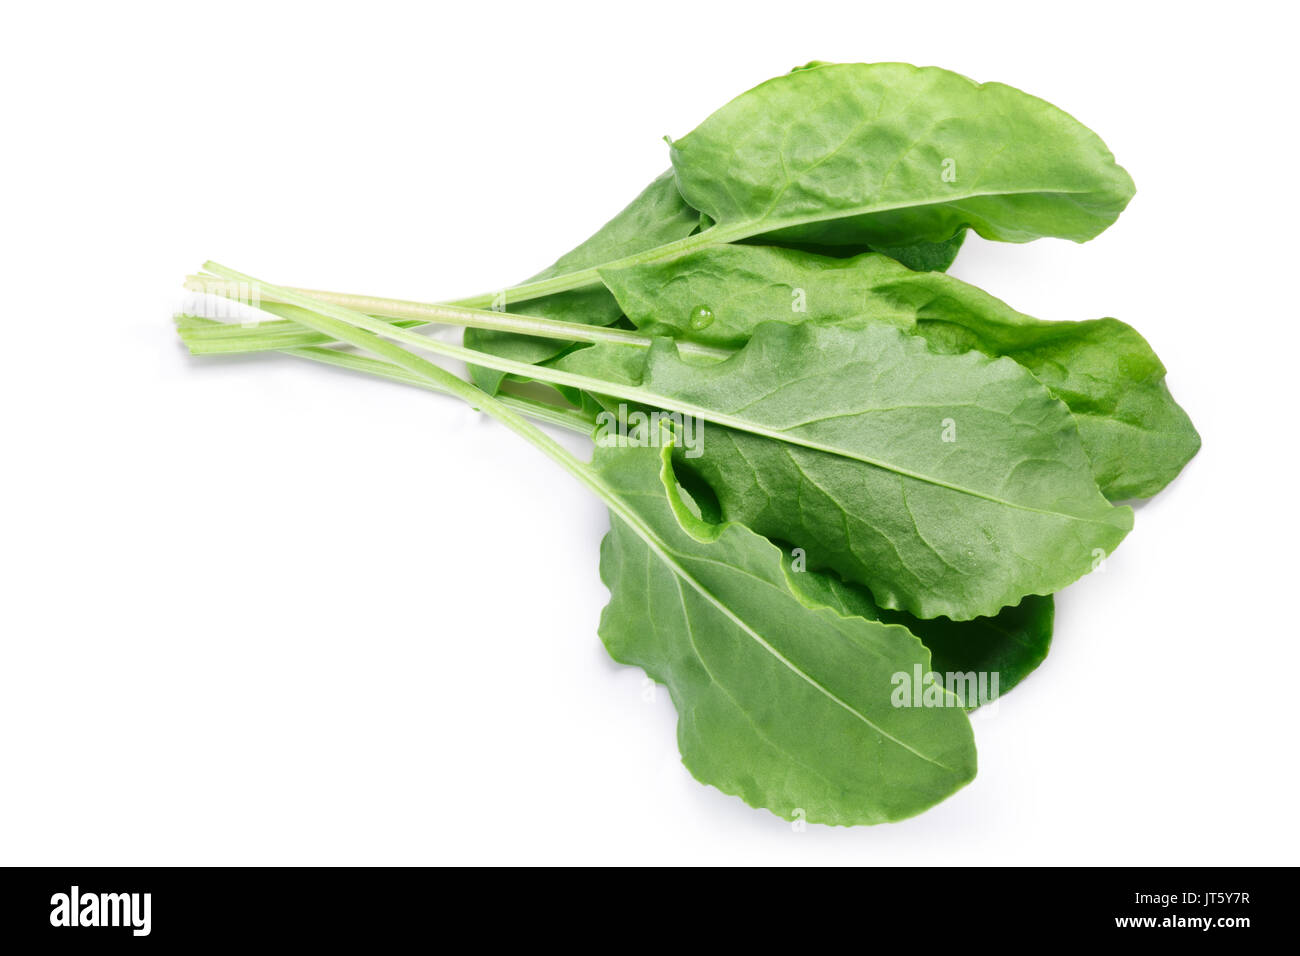 Bundle of fresh Sorrel (Rumex acetosa) pot herb. Clipping paths, shadow separated, top view Stock Photo